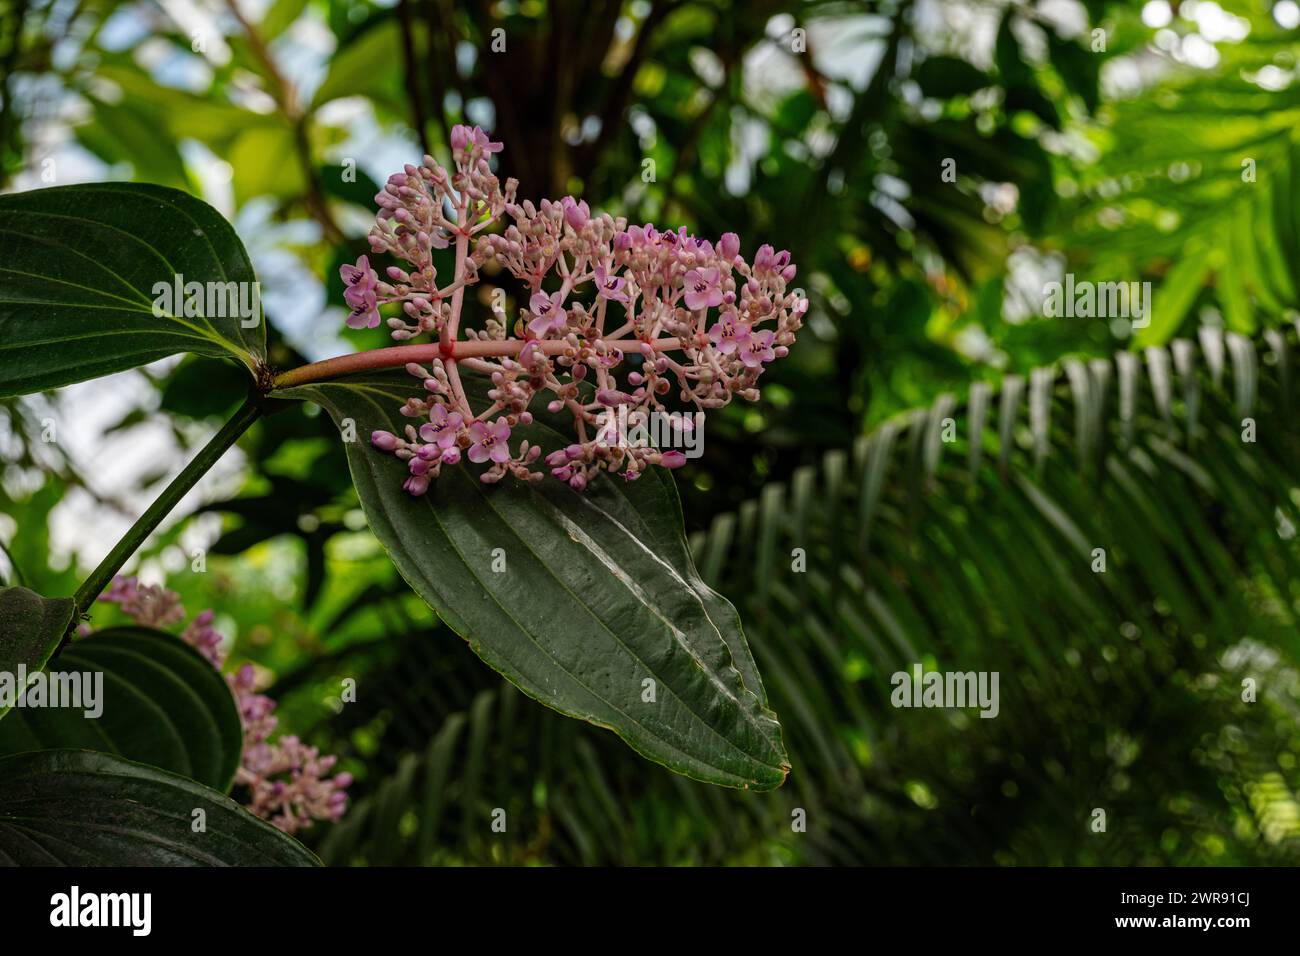 Beginning flowers and leaves of a Medinilla magnifica as a close-up Stock Photo